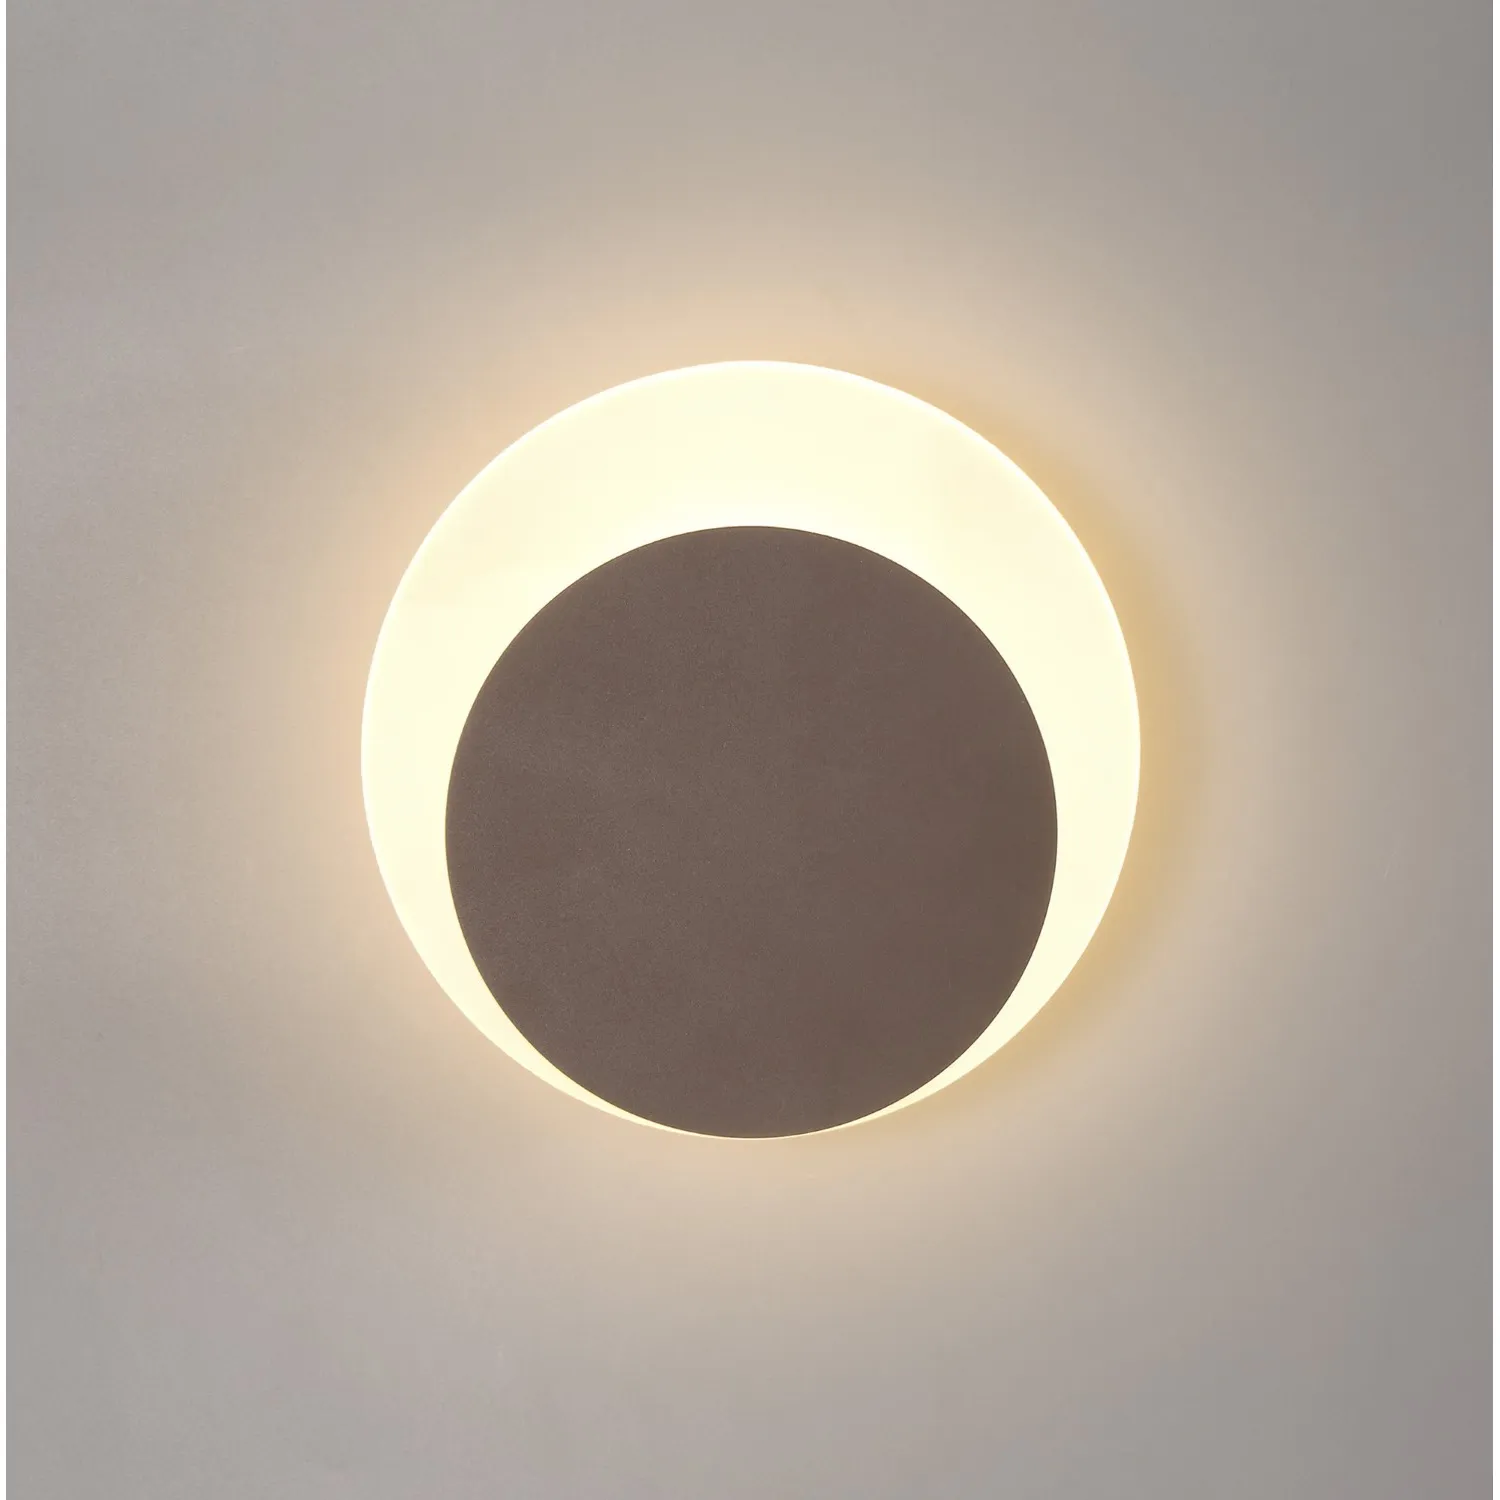 Edgware Magnetic Base Wall Lamp, 12W LED 3000K 498lm, 15 19cm Round Bottom Offset, Coffee Acrylic Frosted Diffuser